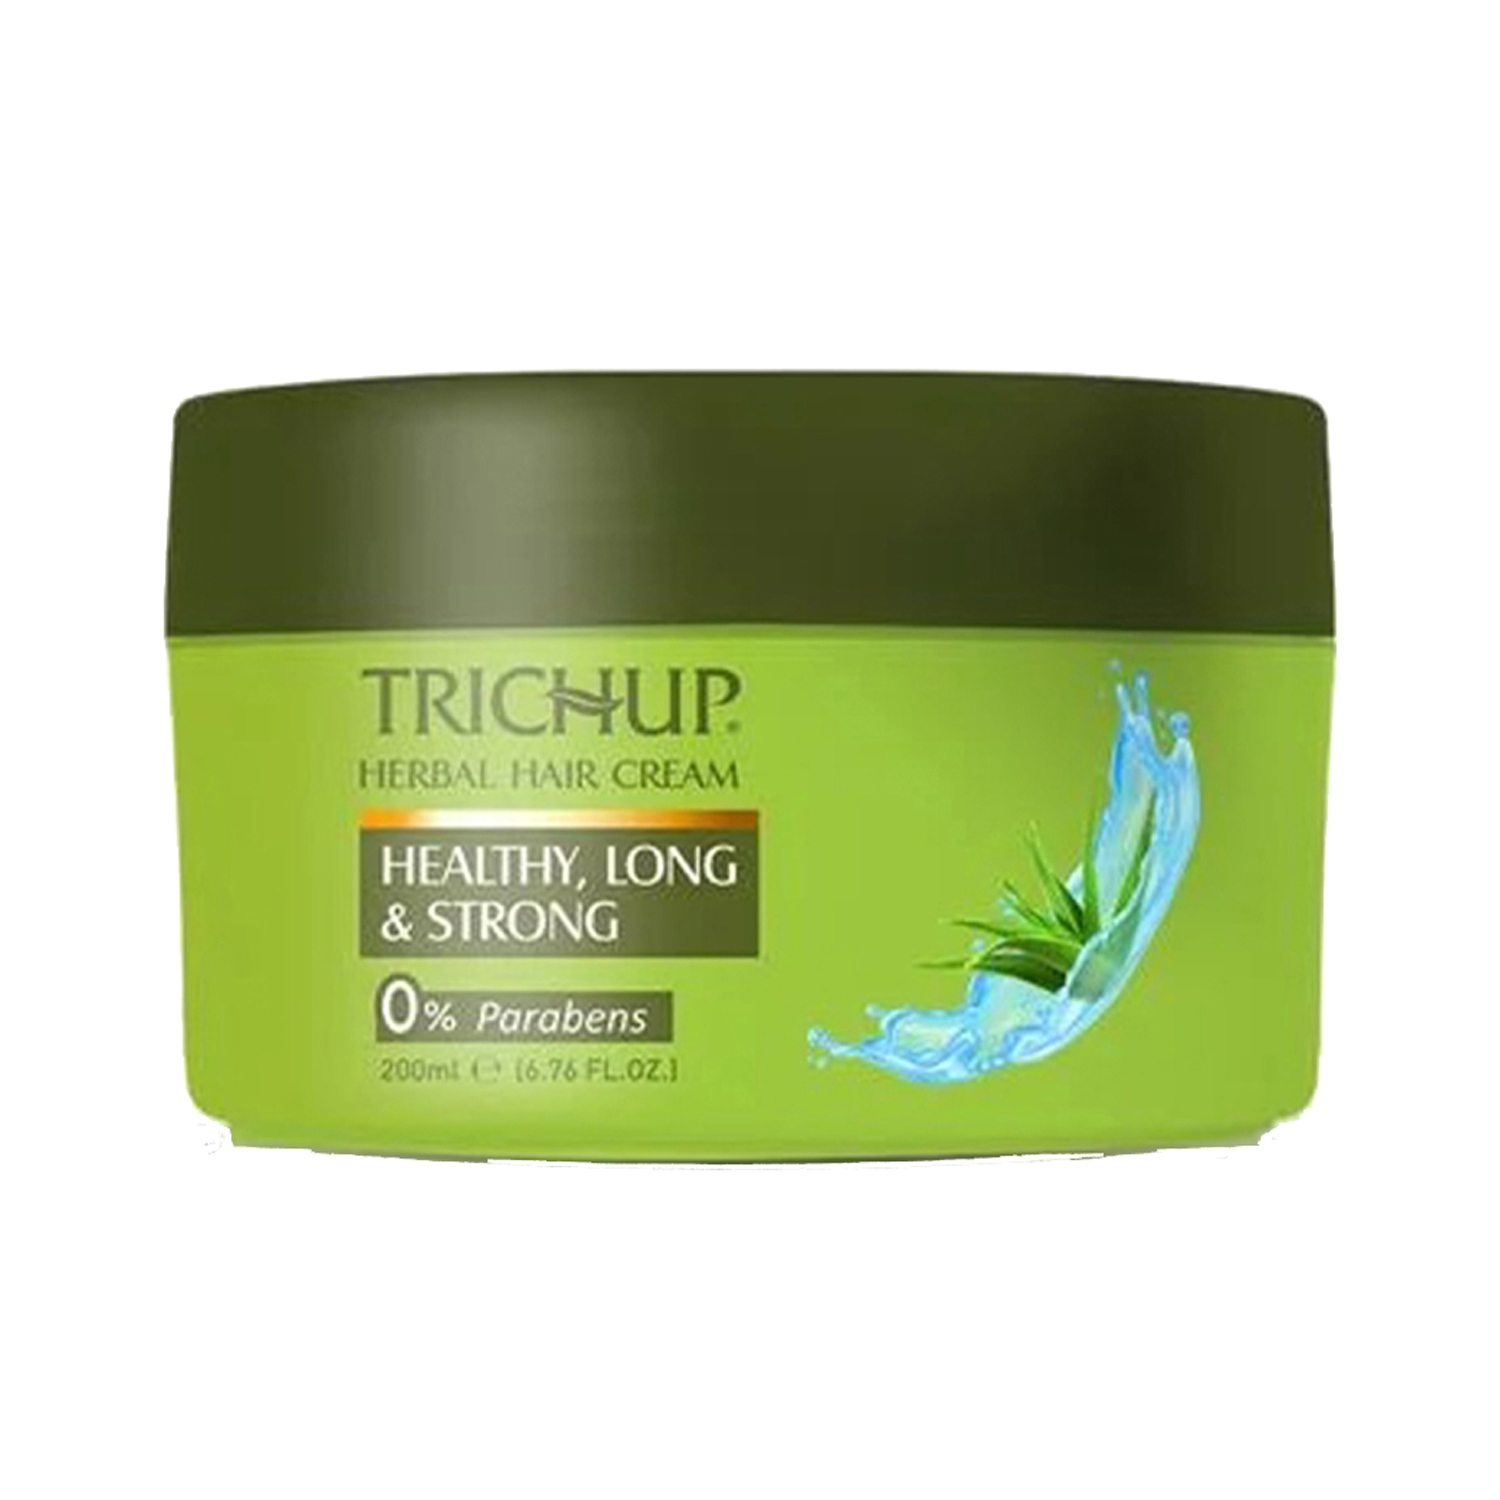 Trichup | Trichup Healthy Long & Strong Control Herbal Hair Cream (200ml)